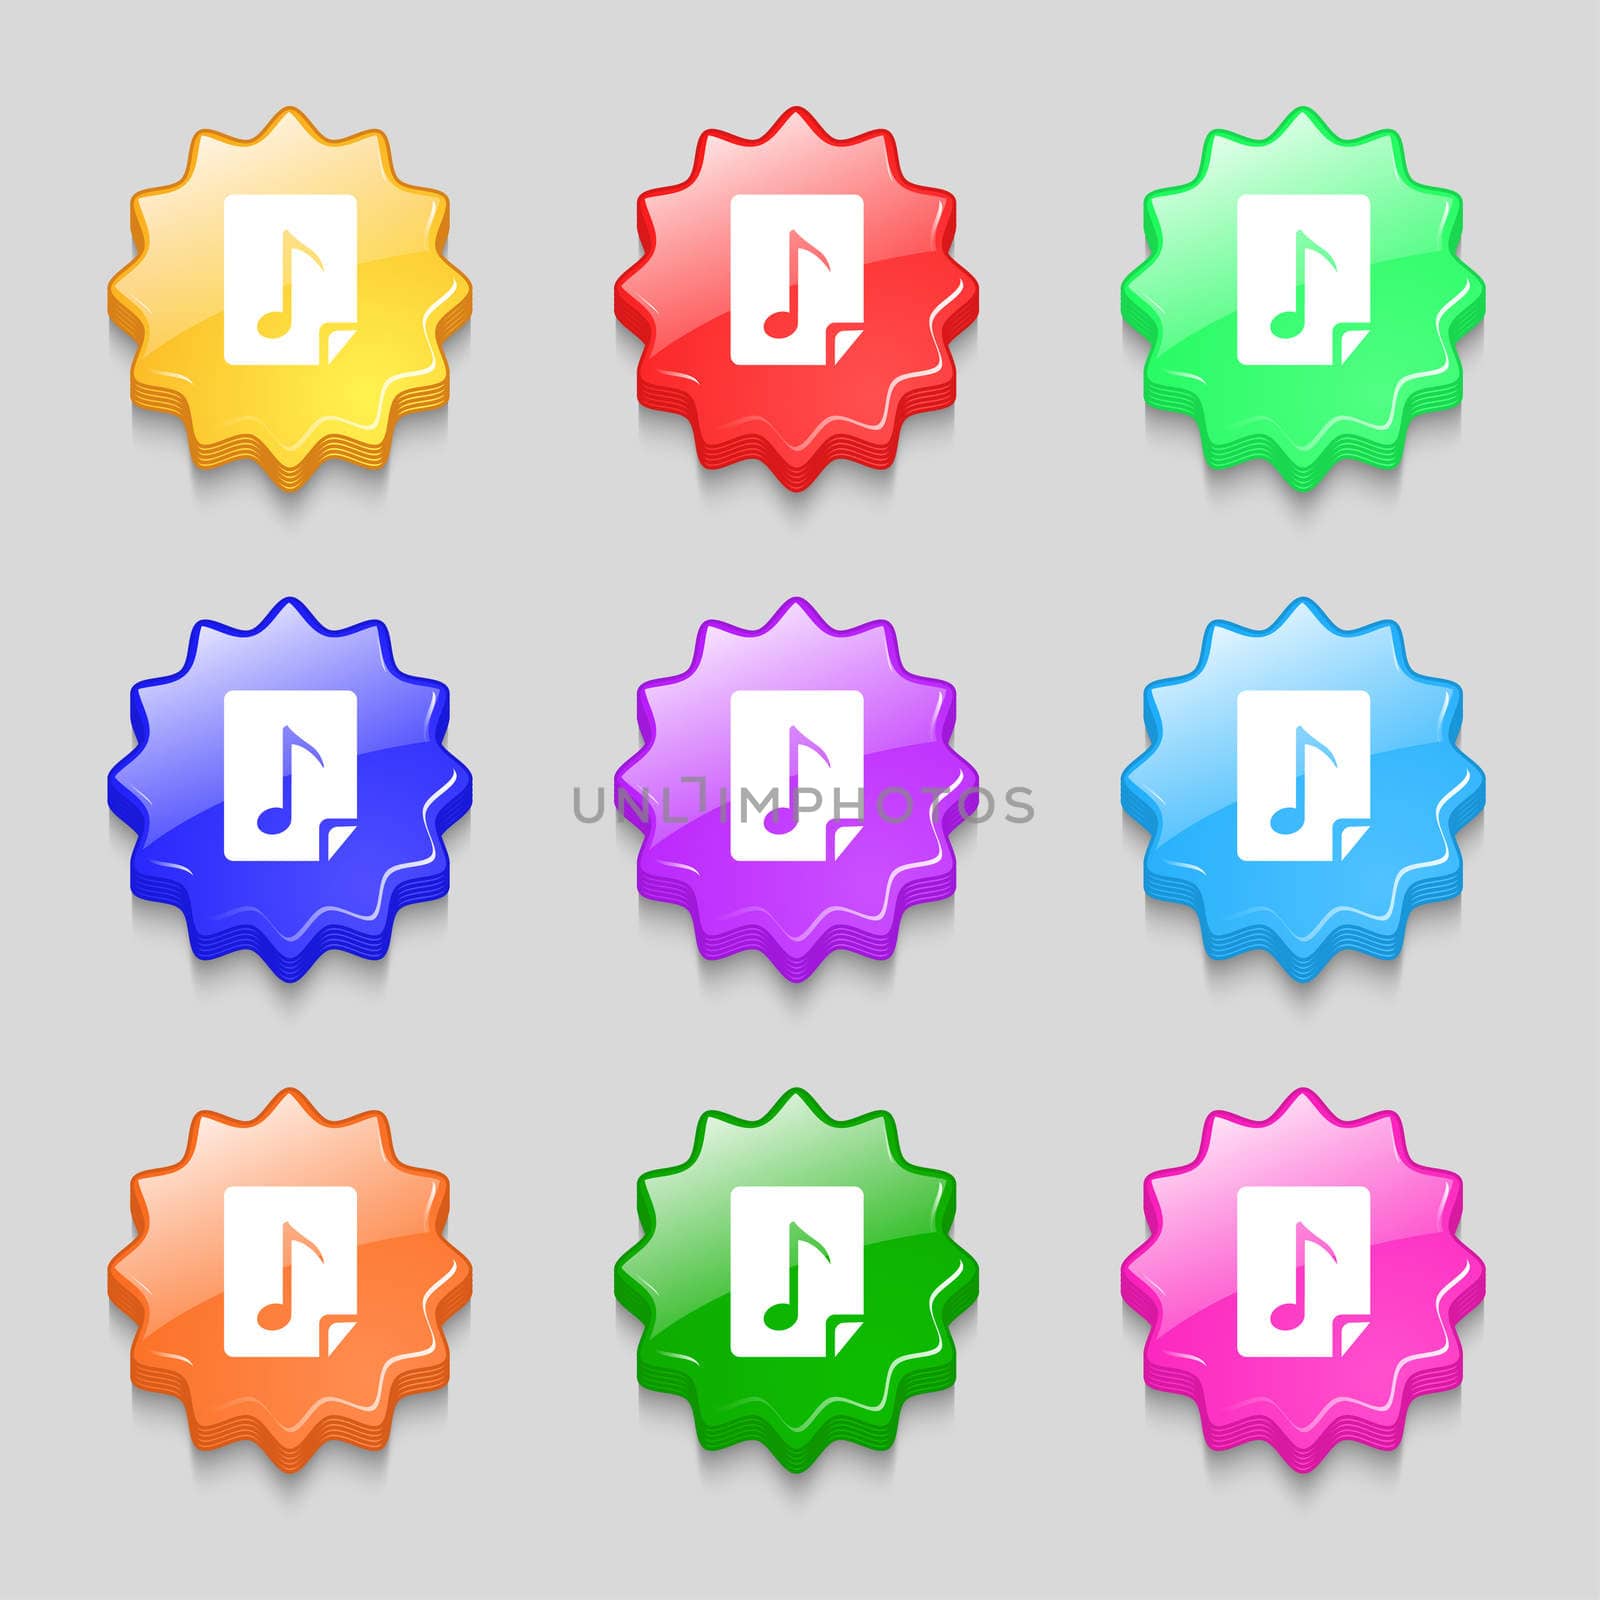 Audio, MP3 file icon sign. symbol on nine wavy colourful buttons. illustration